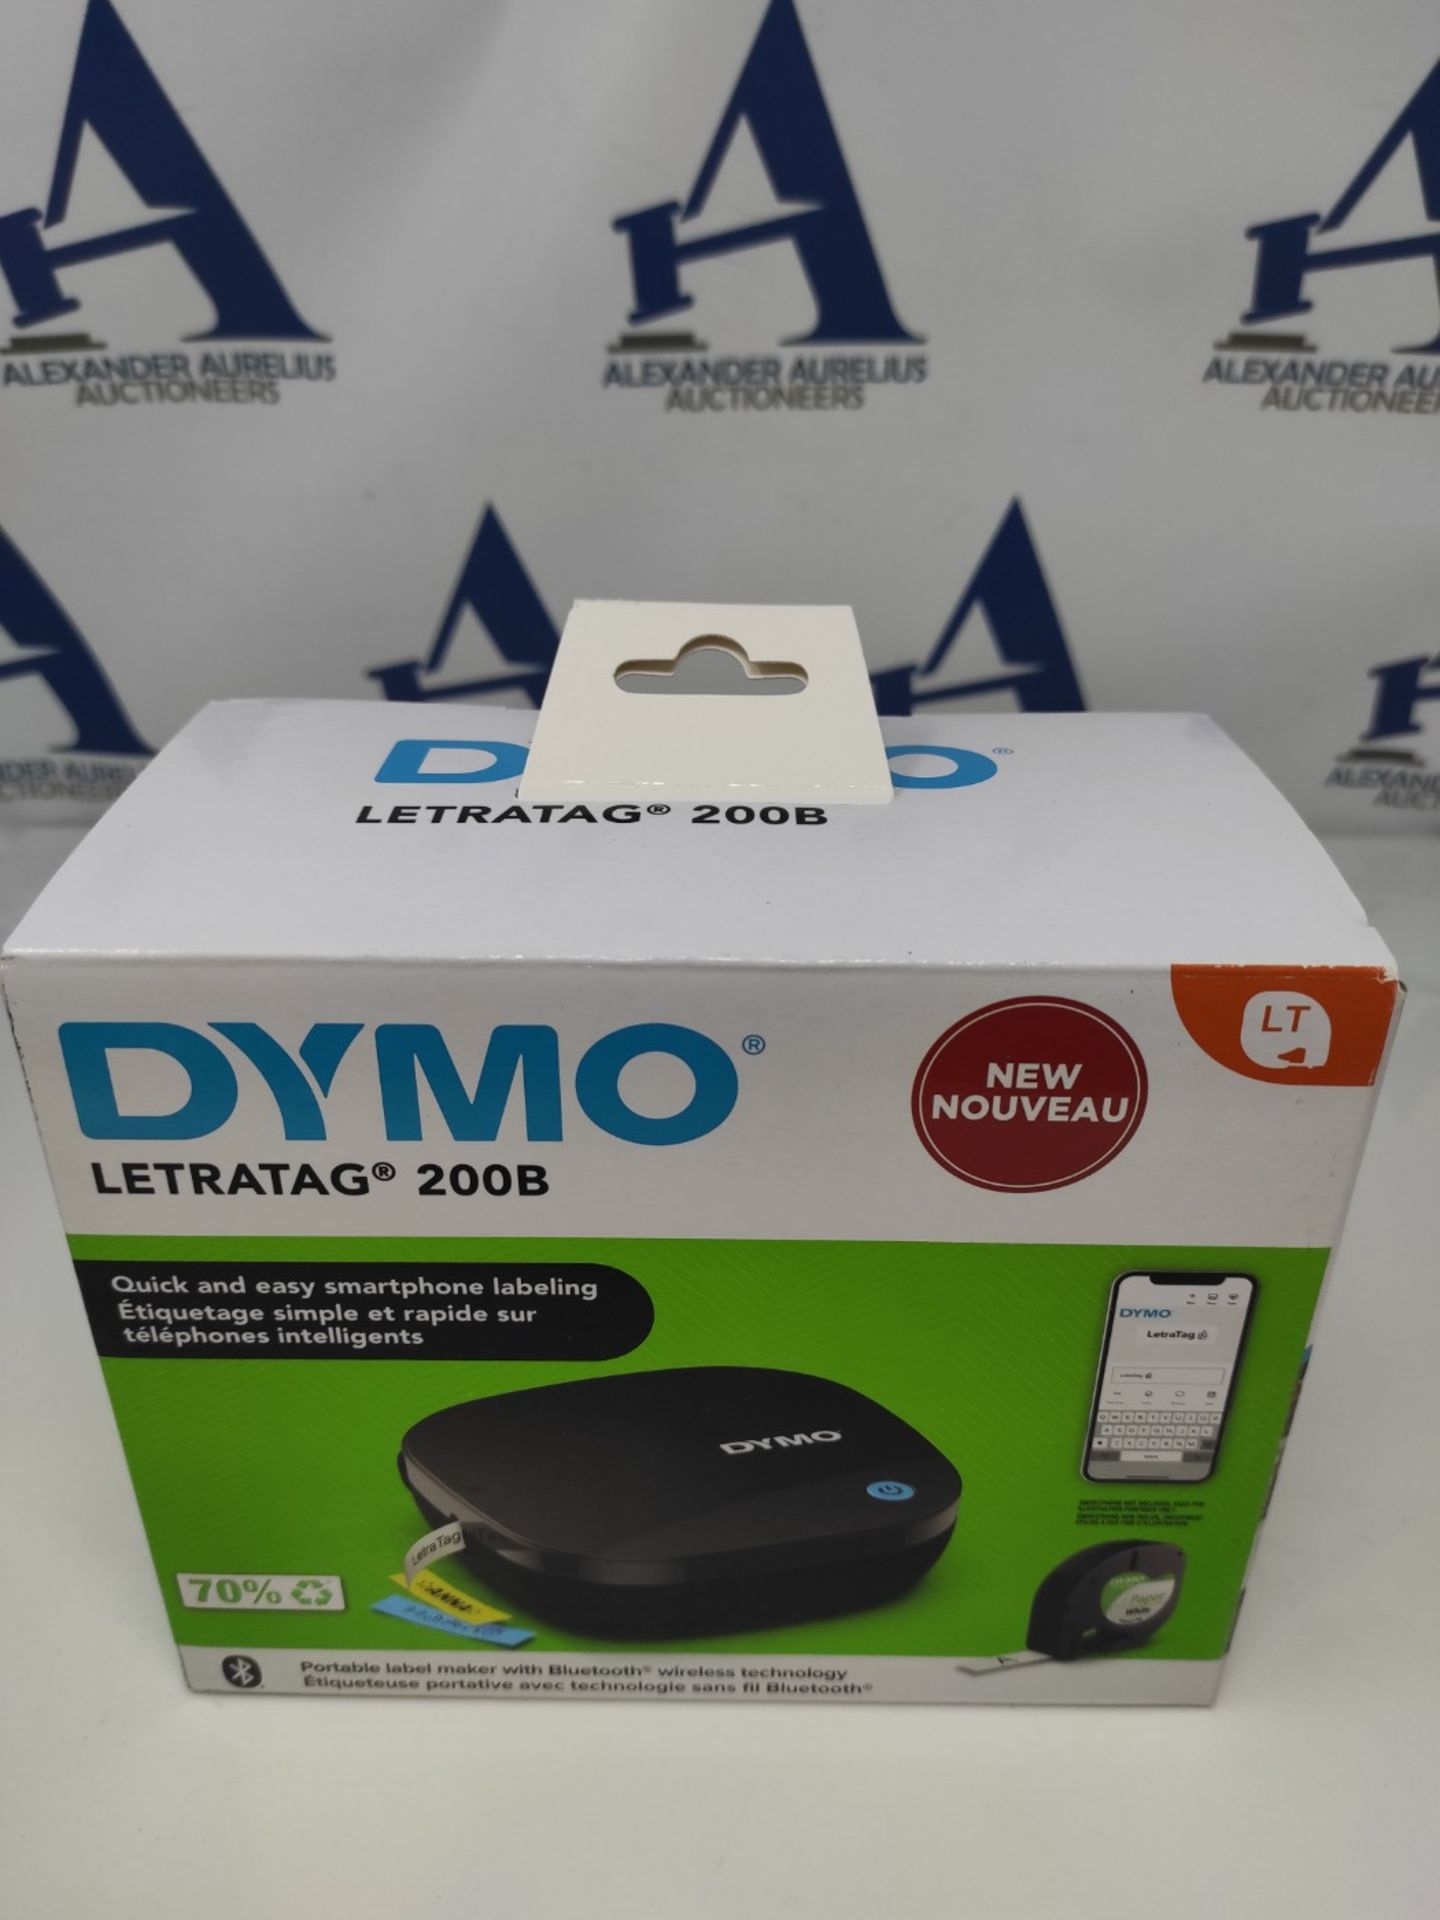 DYMO LetraTag 200B-Labeling device with Bluetooth | compact label printer | connects w - Image 2 of 3